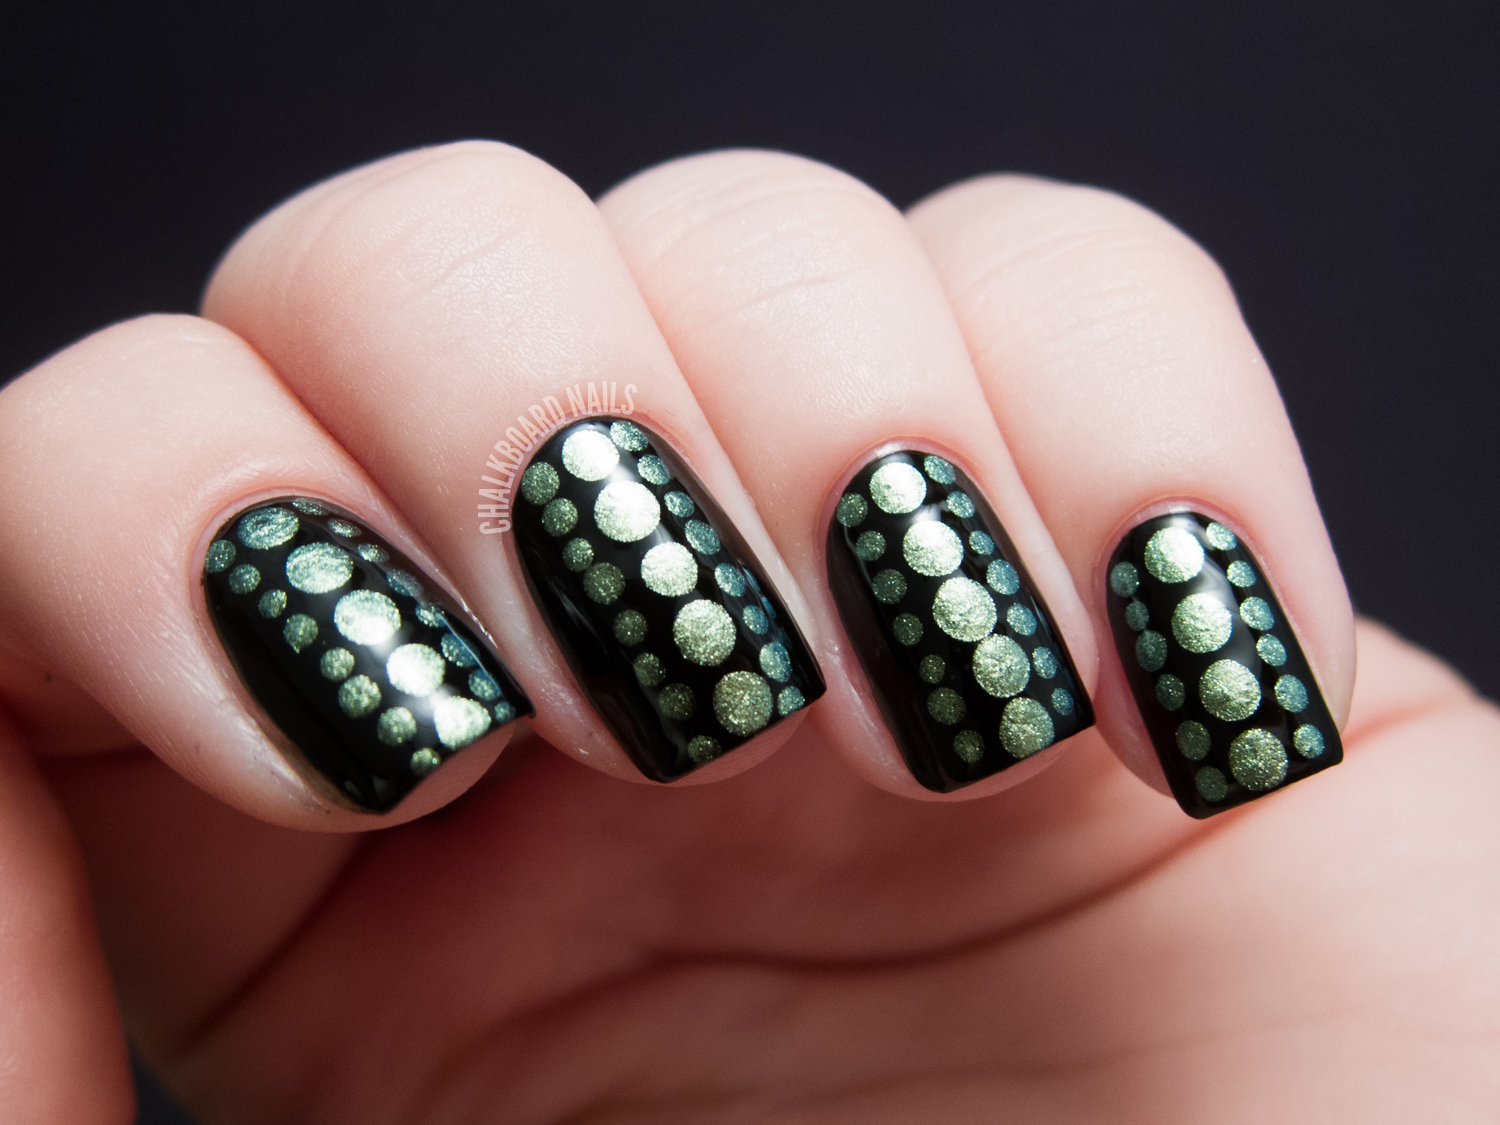 5. Metallic Lines and Dots Nail Design - wide 10